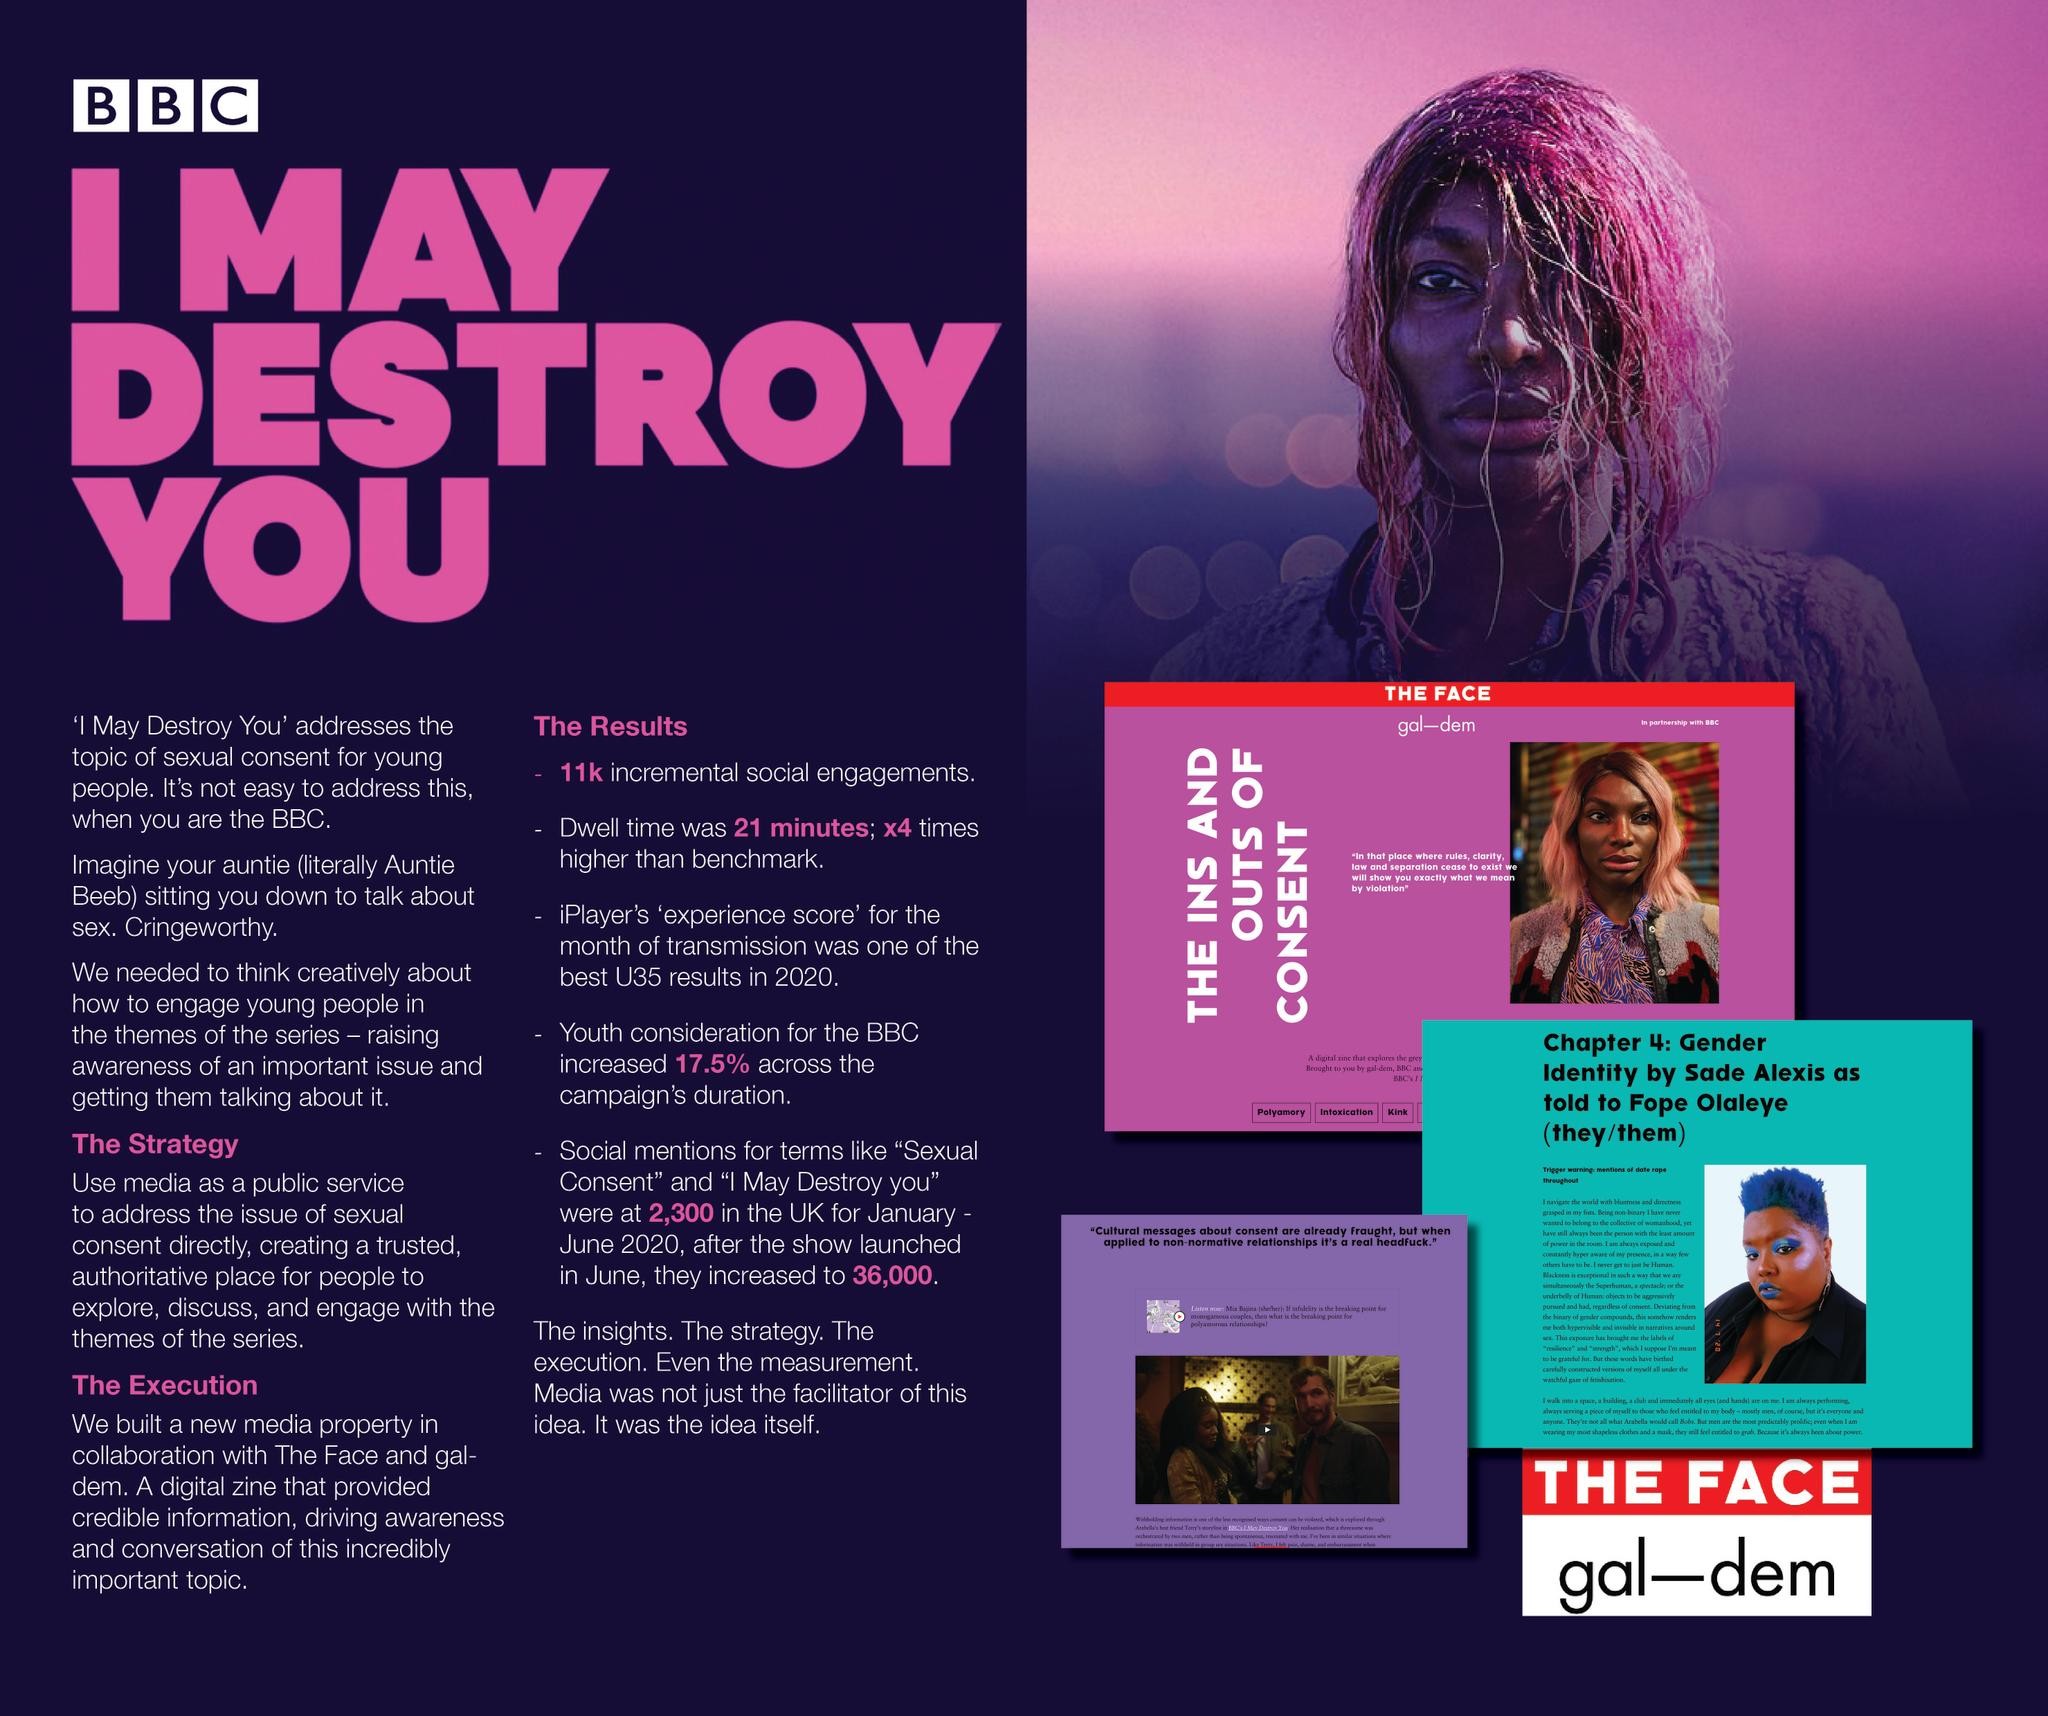 BBC: I May Destroy You